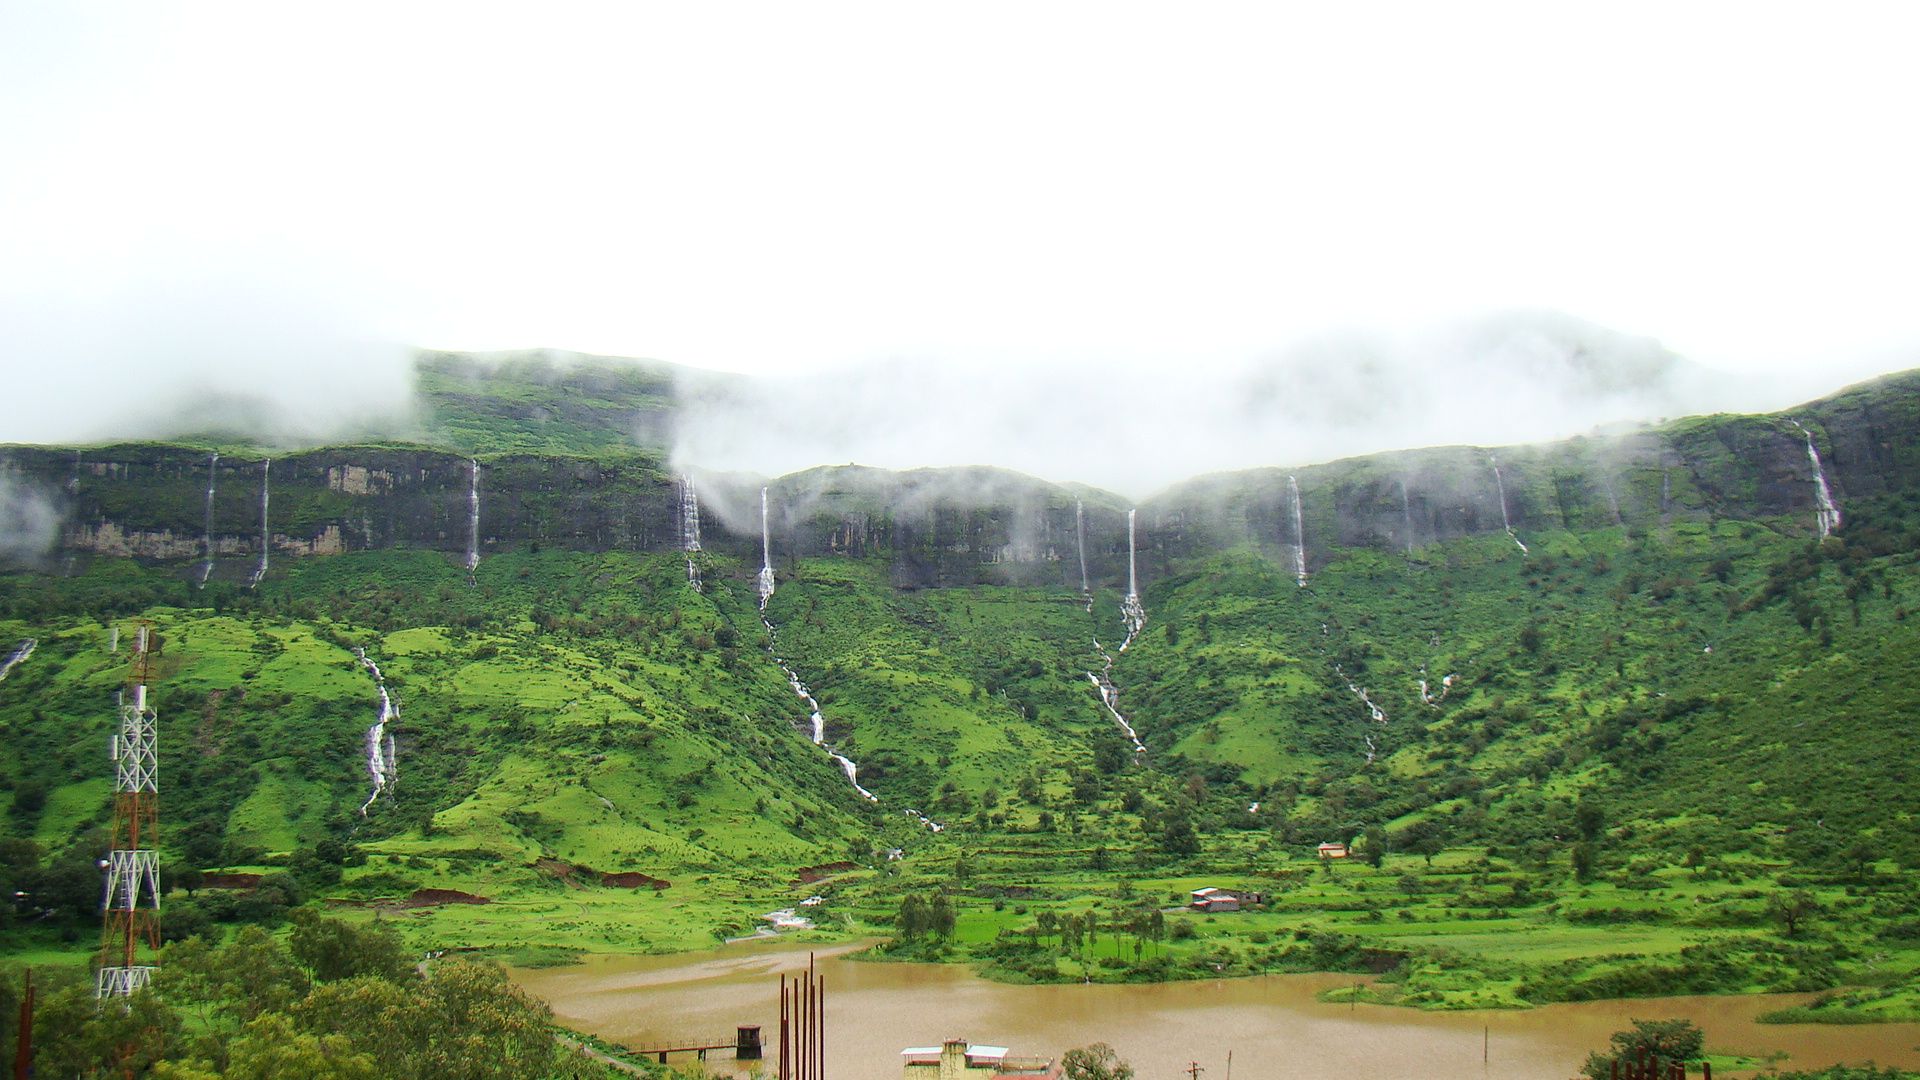 This the real Natural Beauty of Nashik. because of this in every rainy season people feel the Natural Beauty.